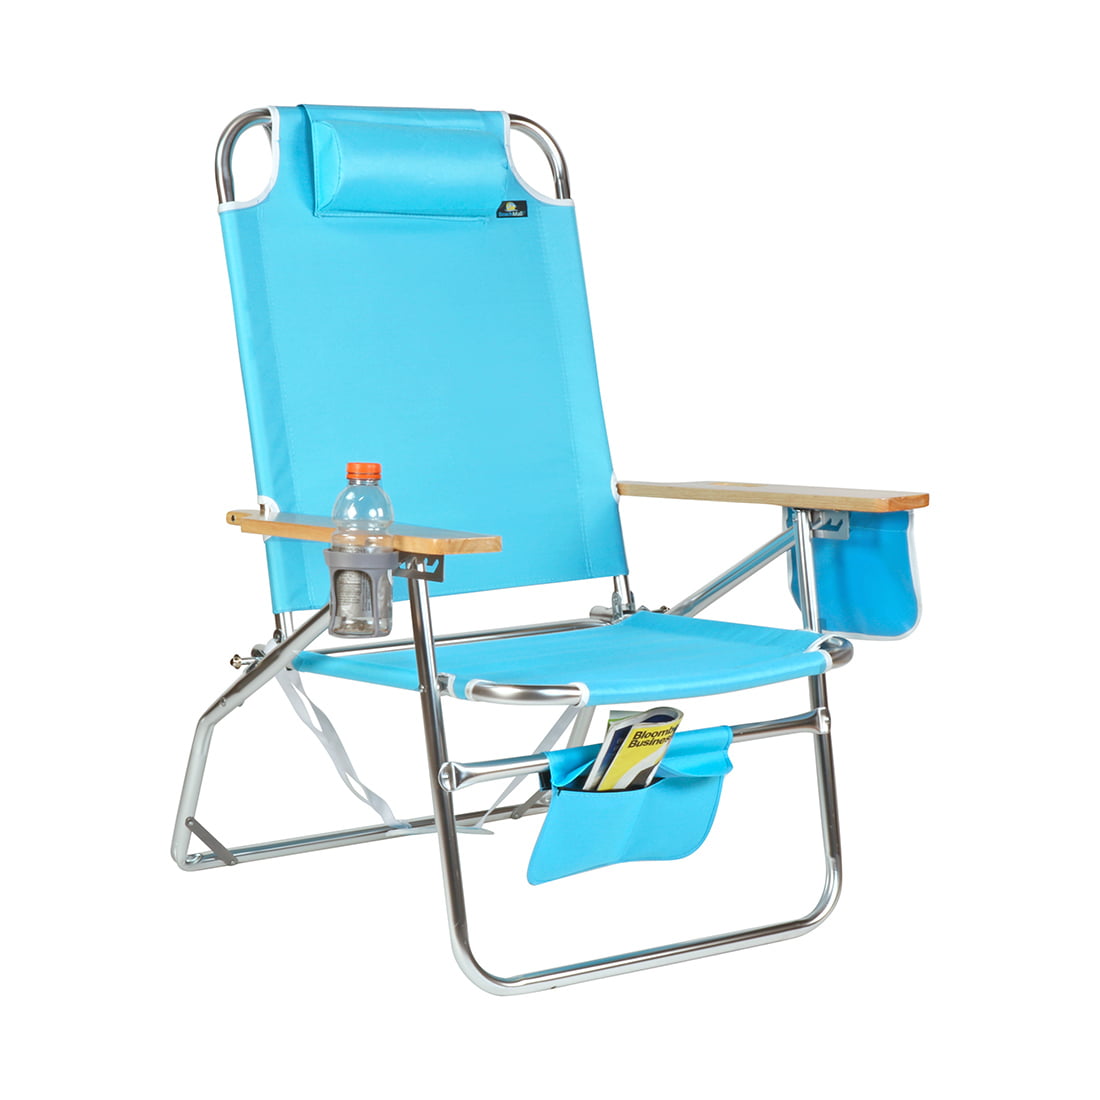 Unique Best Beach Chair For Big And Tall for Large Space